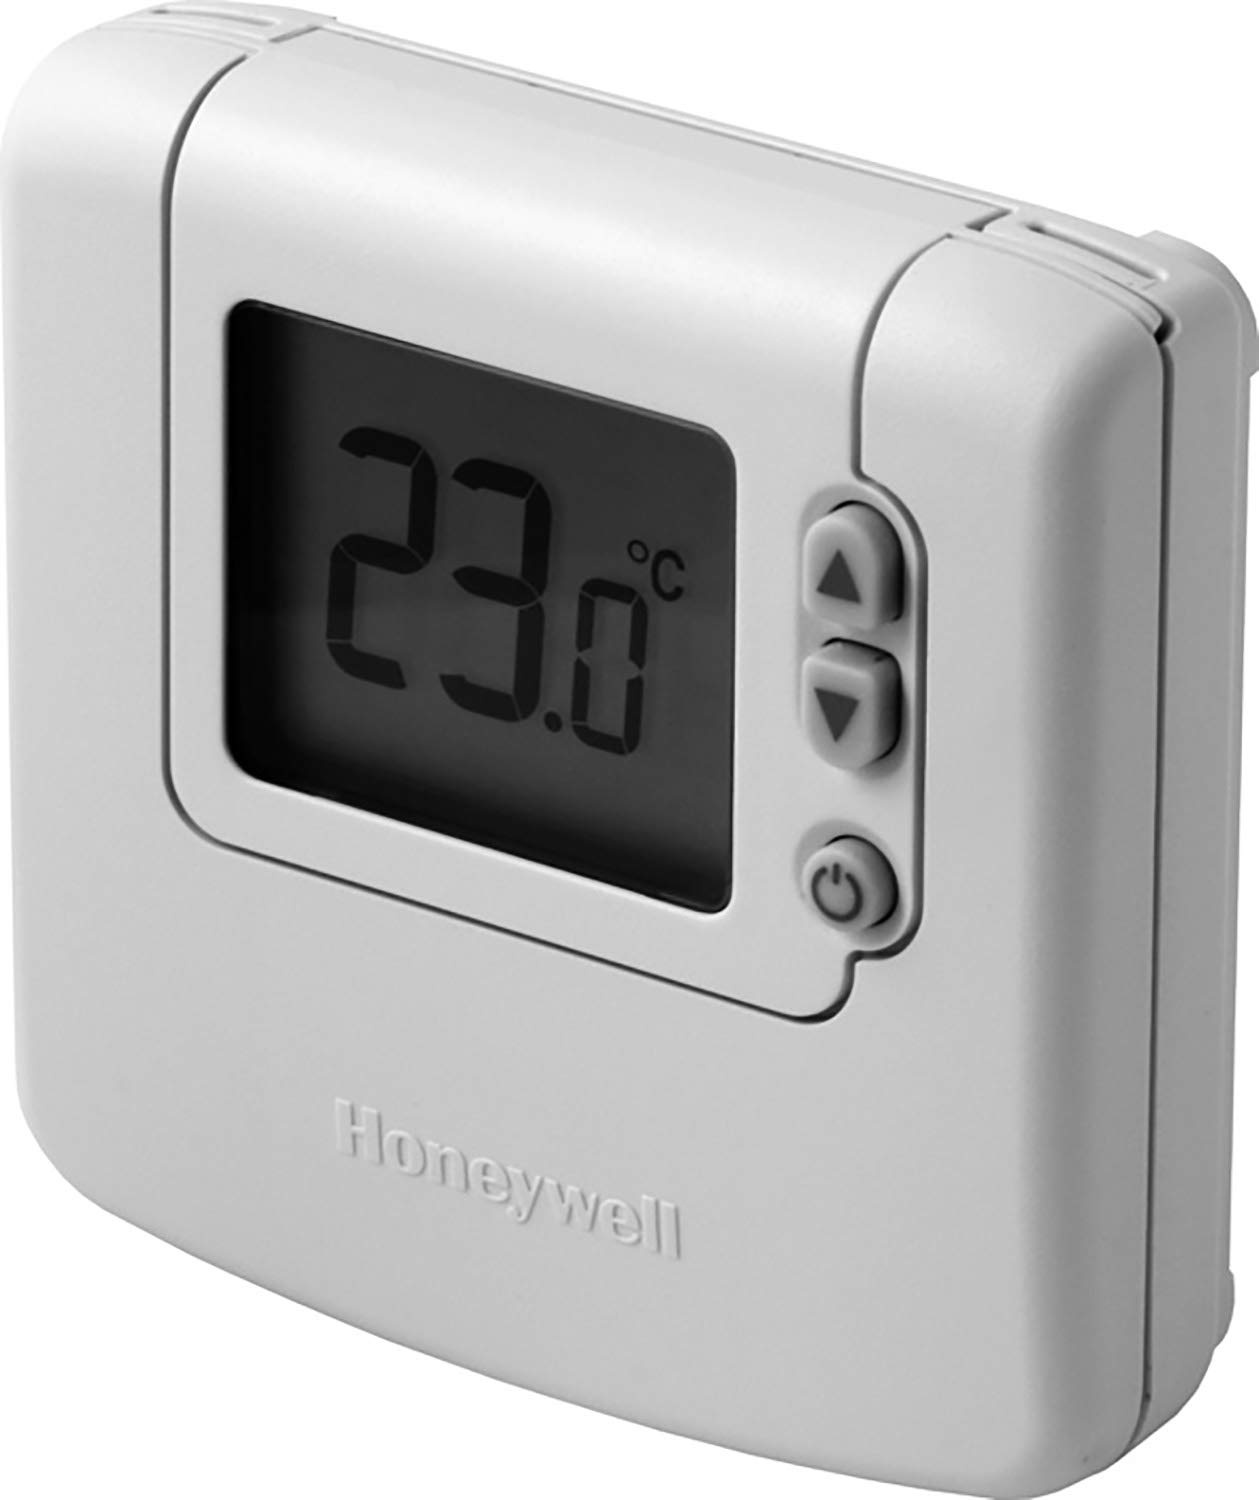 Honeywell DT90A1008 Digitales Thermostat